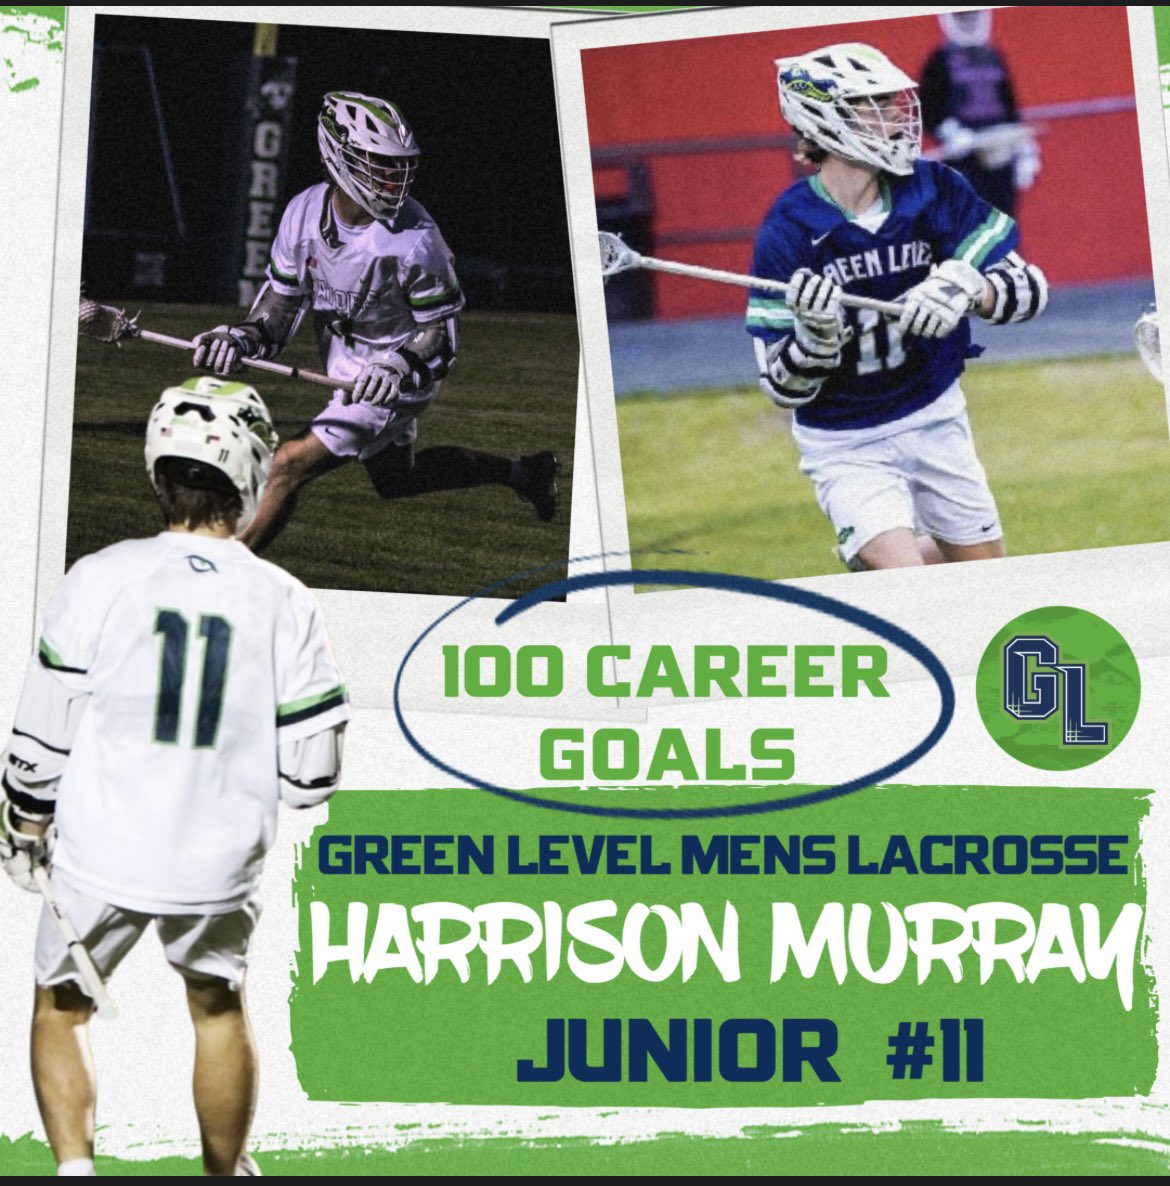 He’s so good, it’s his second milestone this season! Congrats to Junior Harrison Murray on hitting 100 career goals last night in the win over Middle Creek! Harrison is having an incredible junior season and he’s not slowing down!! #GoGators #100club 🔥💯🐊🥍